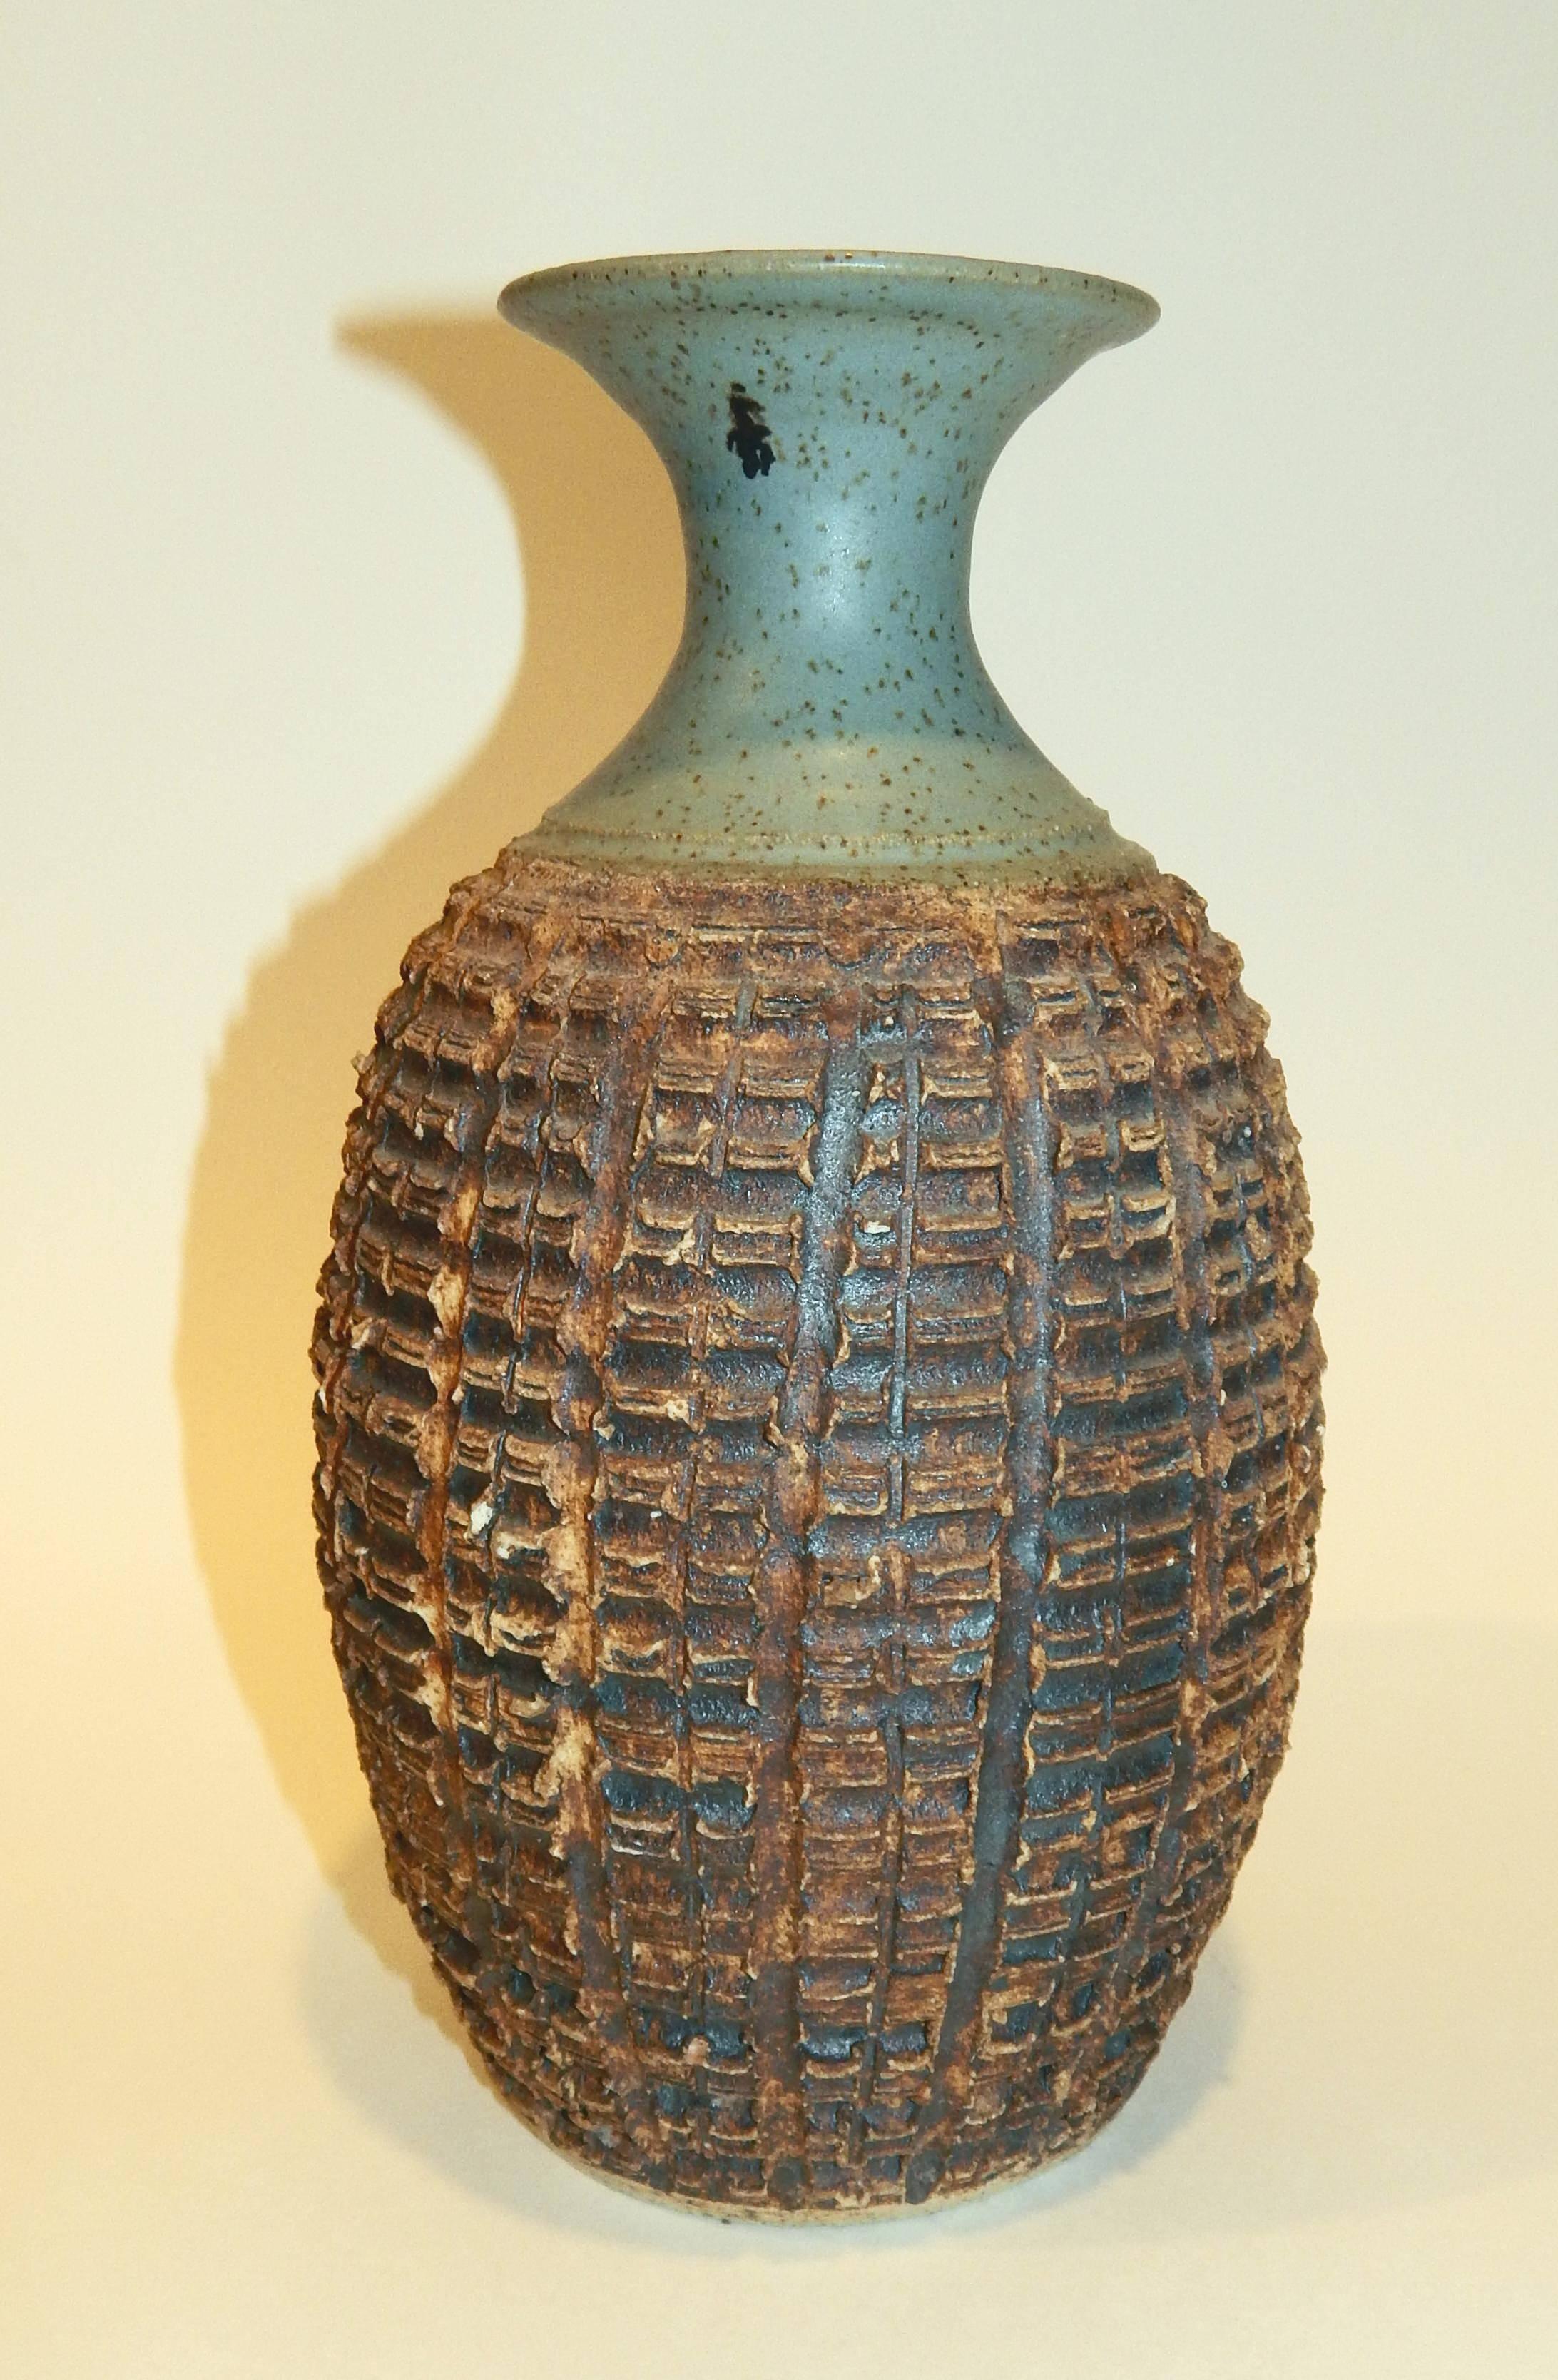 F. Carlton Ball (1911-1992) Studio ceramic vase.
Signed F.C. Ball, circa 1950's-1960's.
Deeply carved vase in rectangles with earthy brown glaze
at the lower part finishing with a Celadon glaze at the top.
Measures: 10 1/4